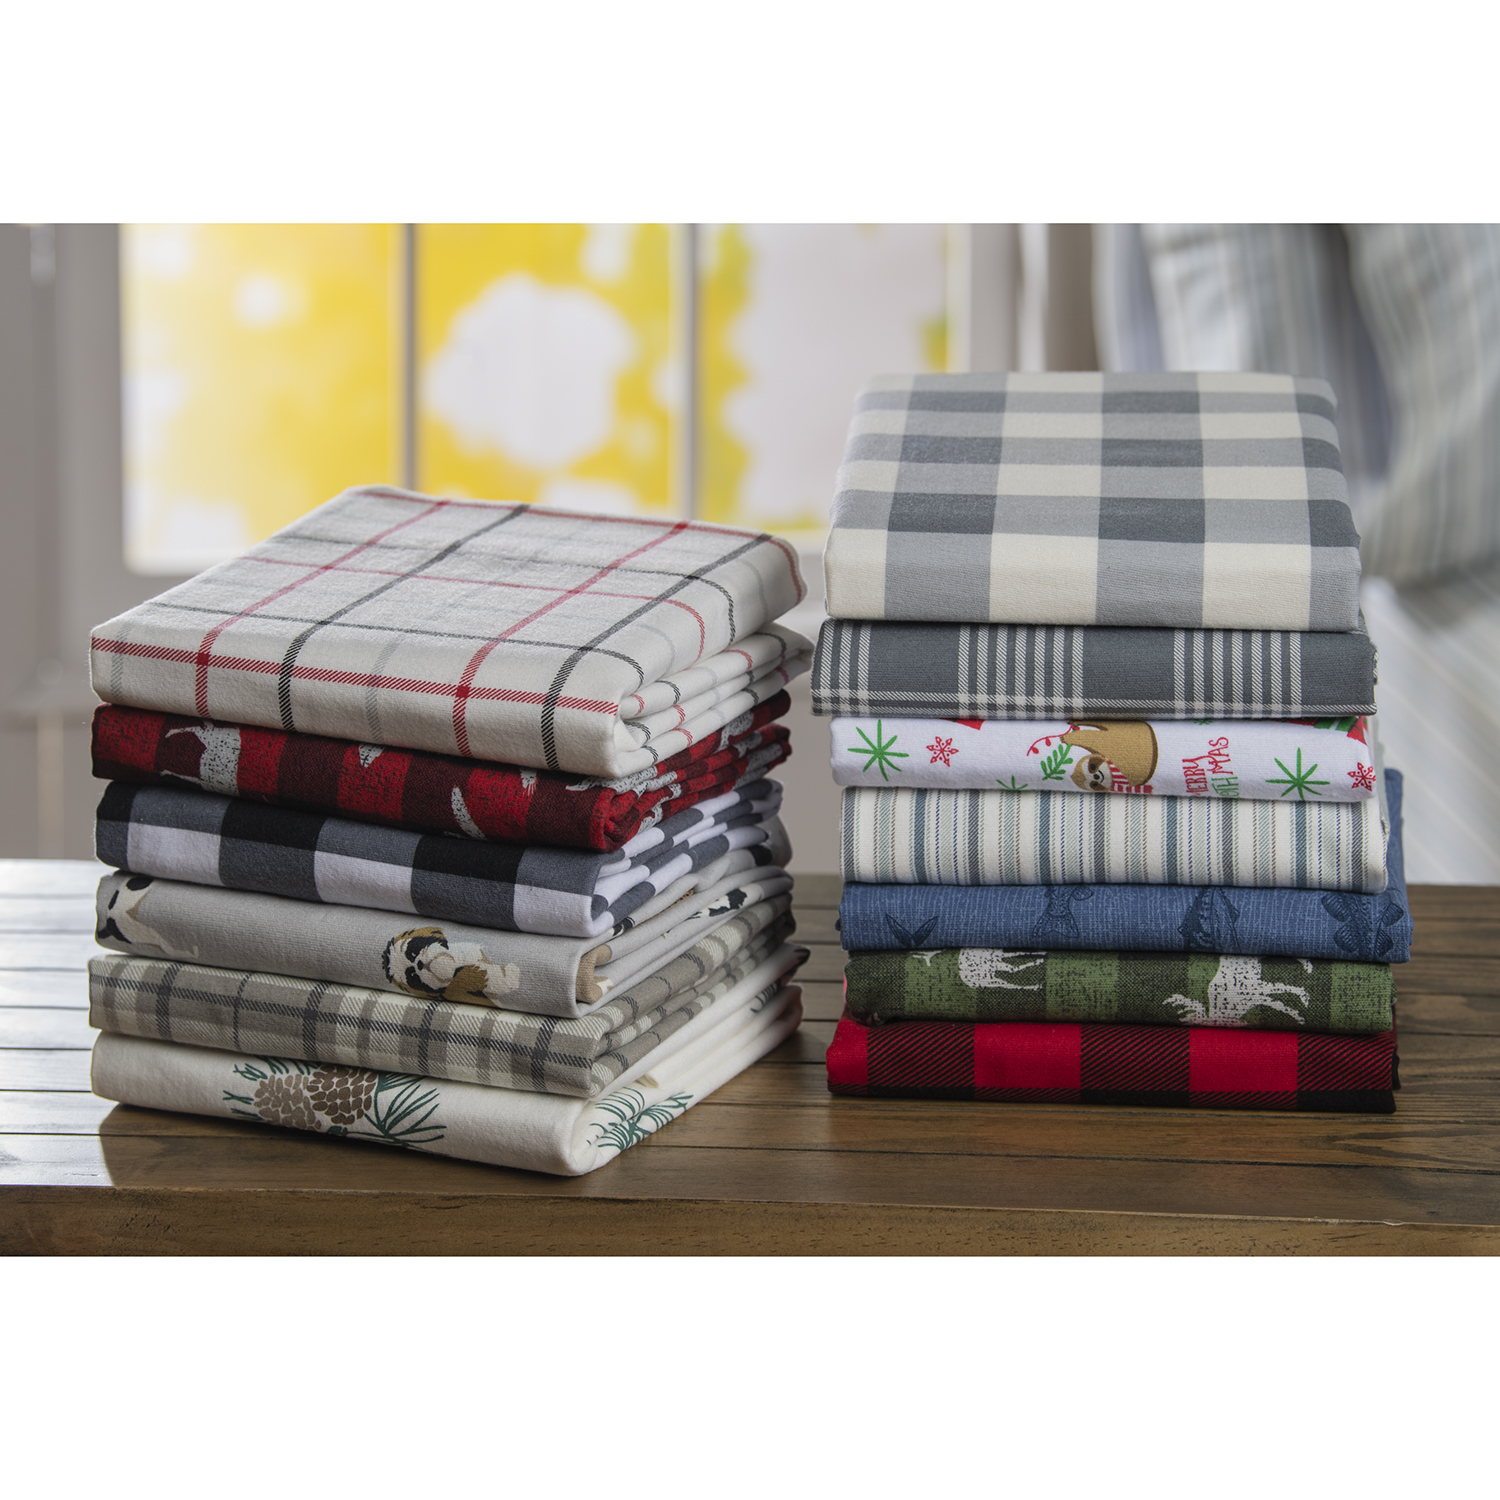 Mainstays Flannel Sheet Set Taupe Plaid Queen - image 5 of 7